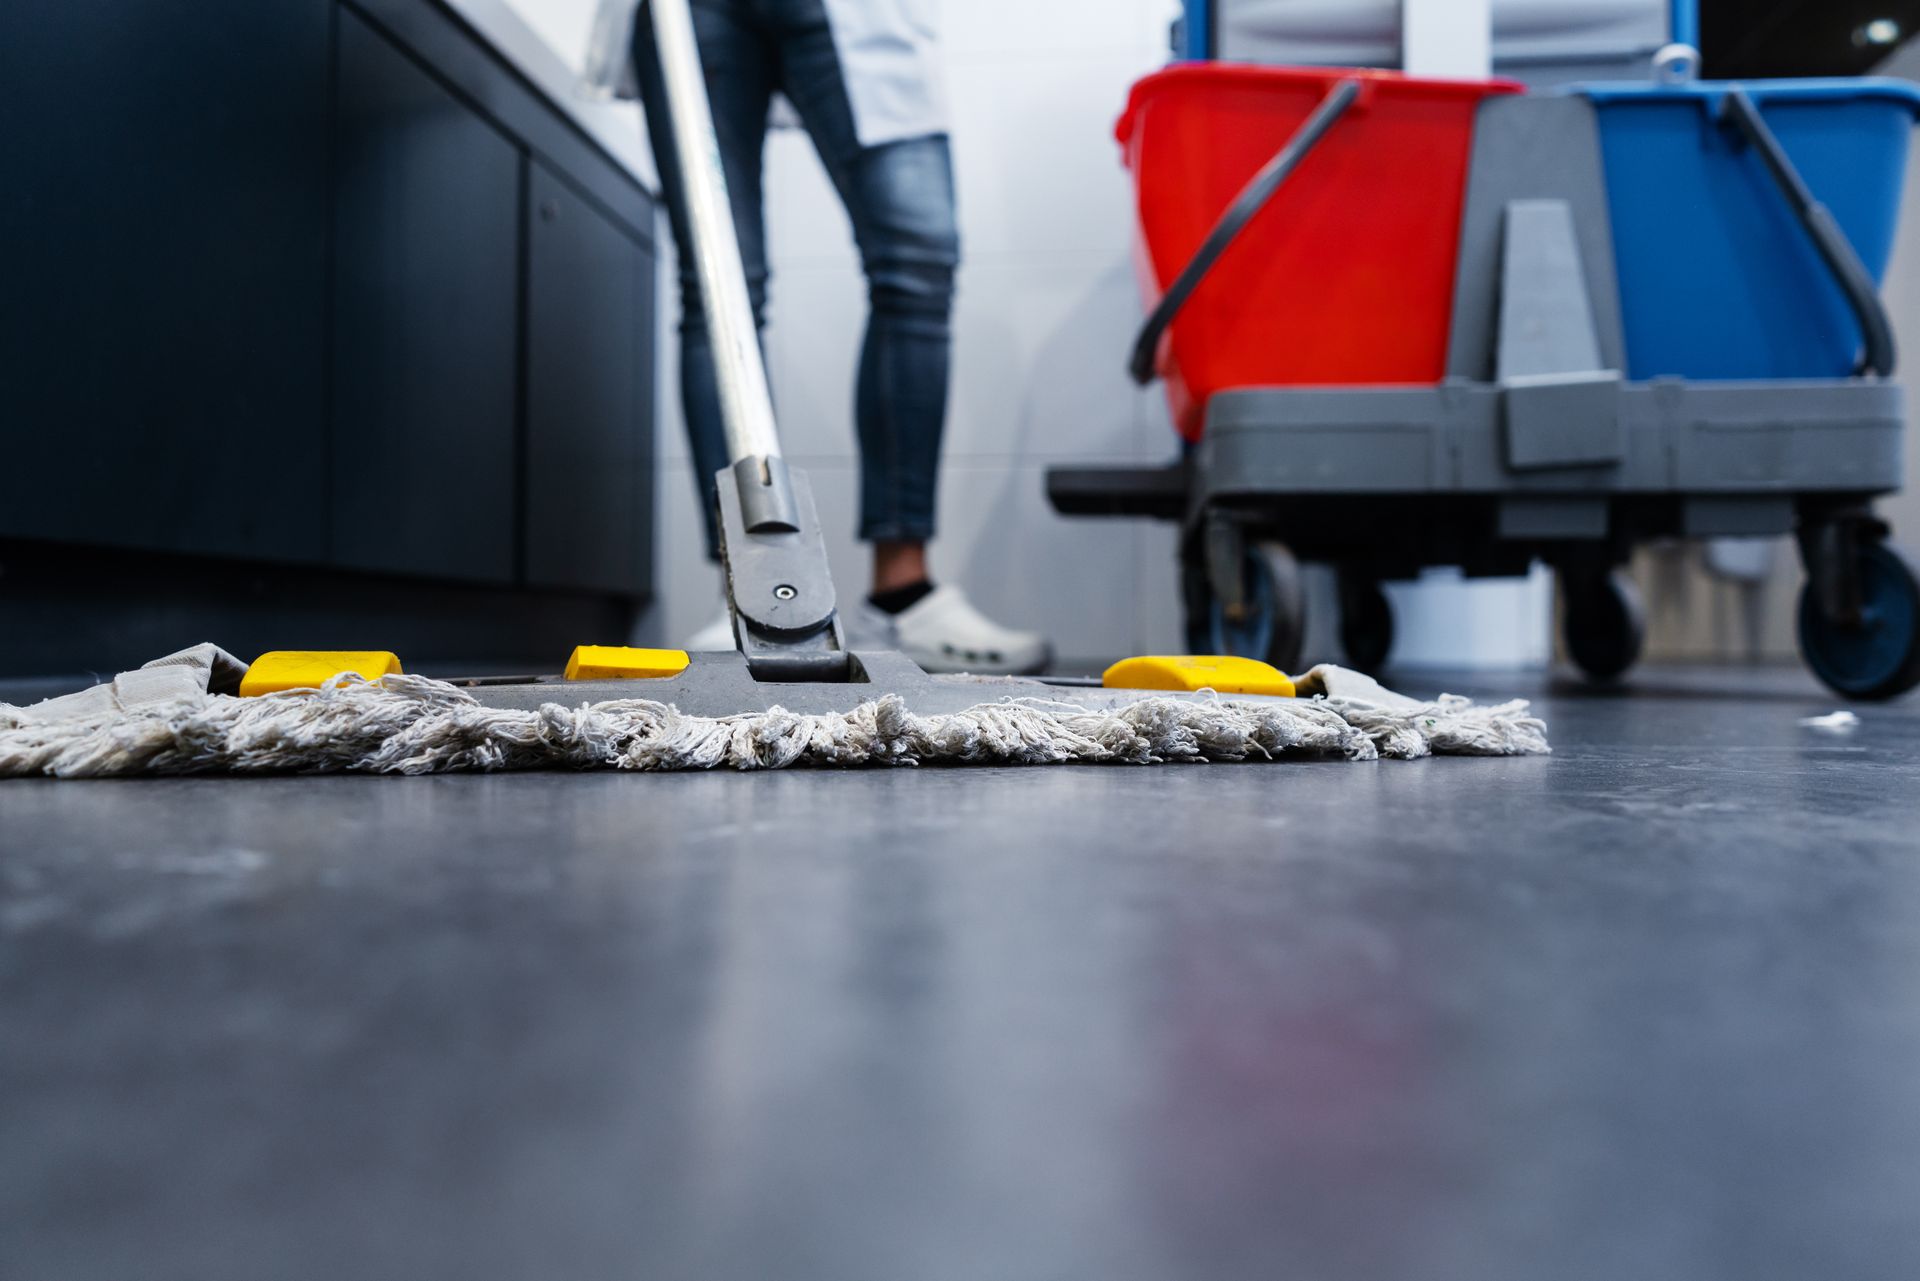 Close-up view of a janitorial worker using a mop to clean the restroom floor, with her cleaning trolley positioned nearby.